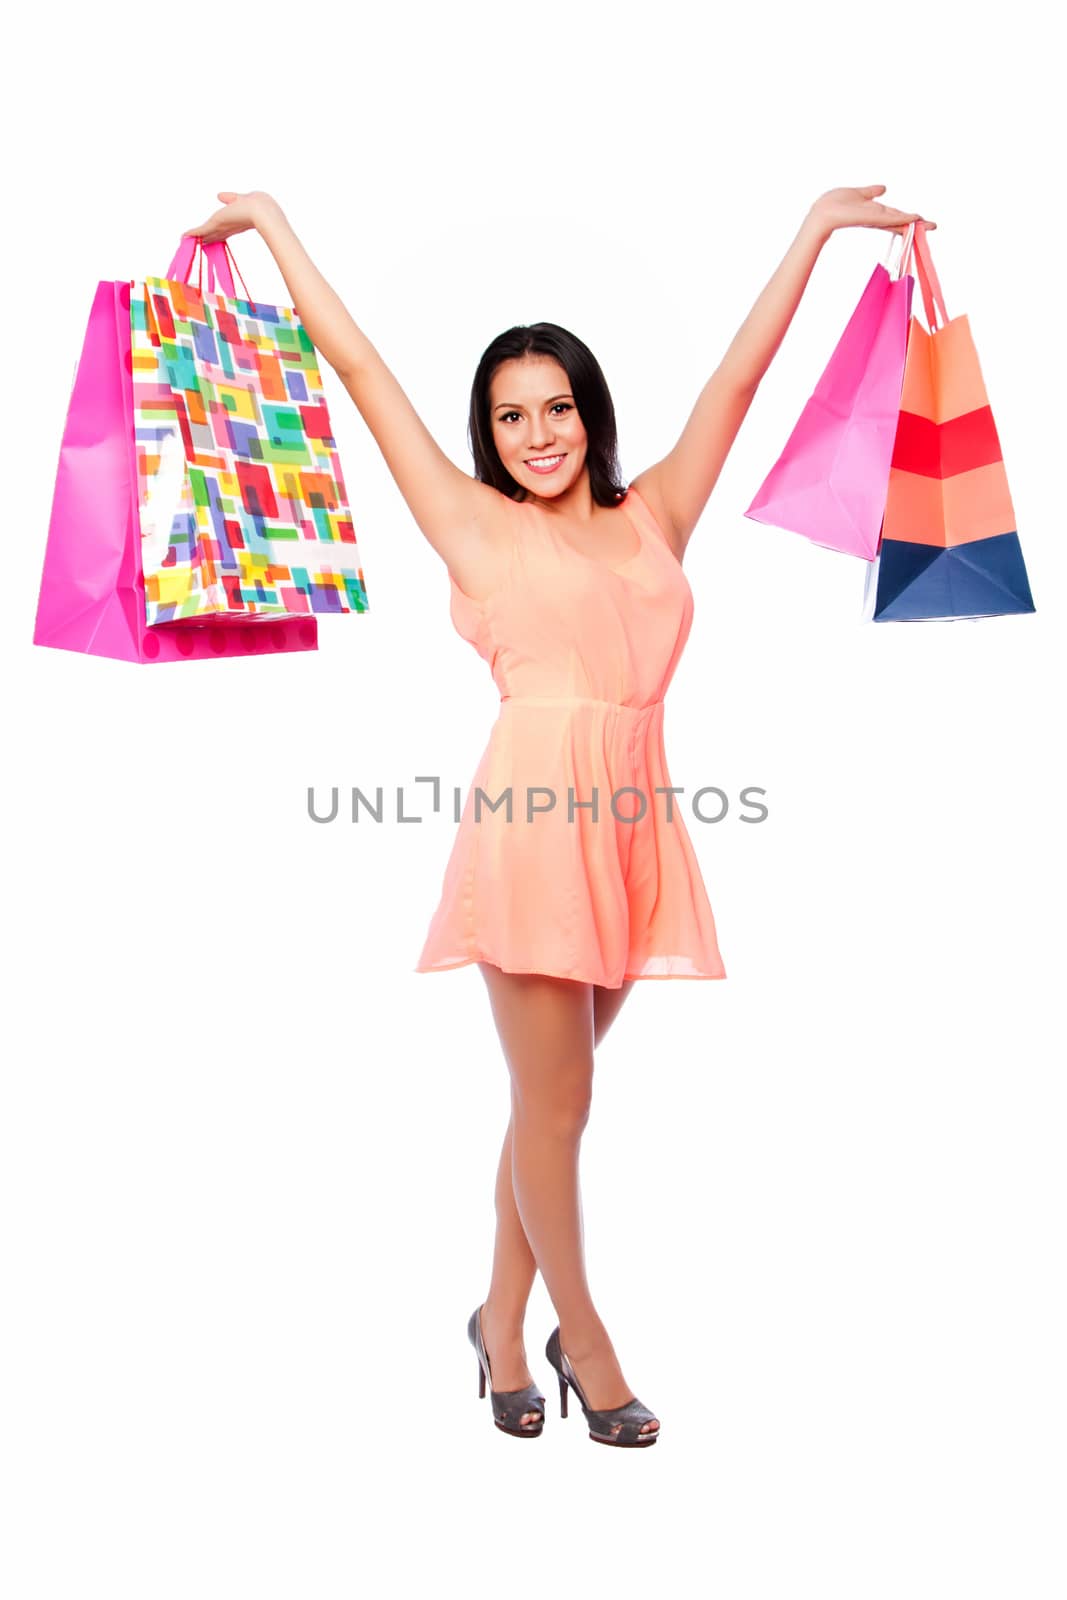 Beautiful happy woman with shopping bags on shoppingspree standing cute with arms in air, consumer lifestyle concept.